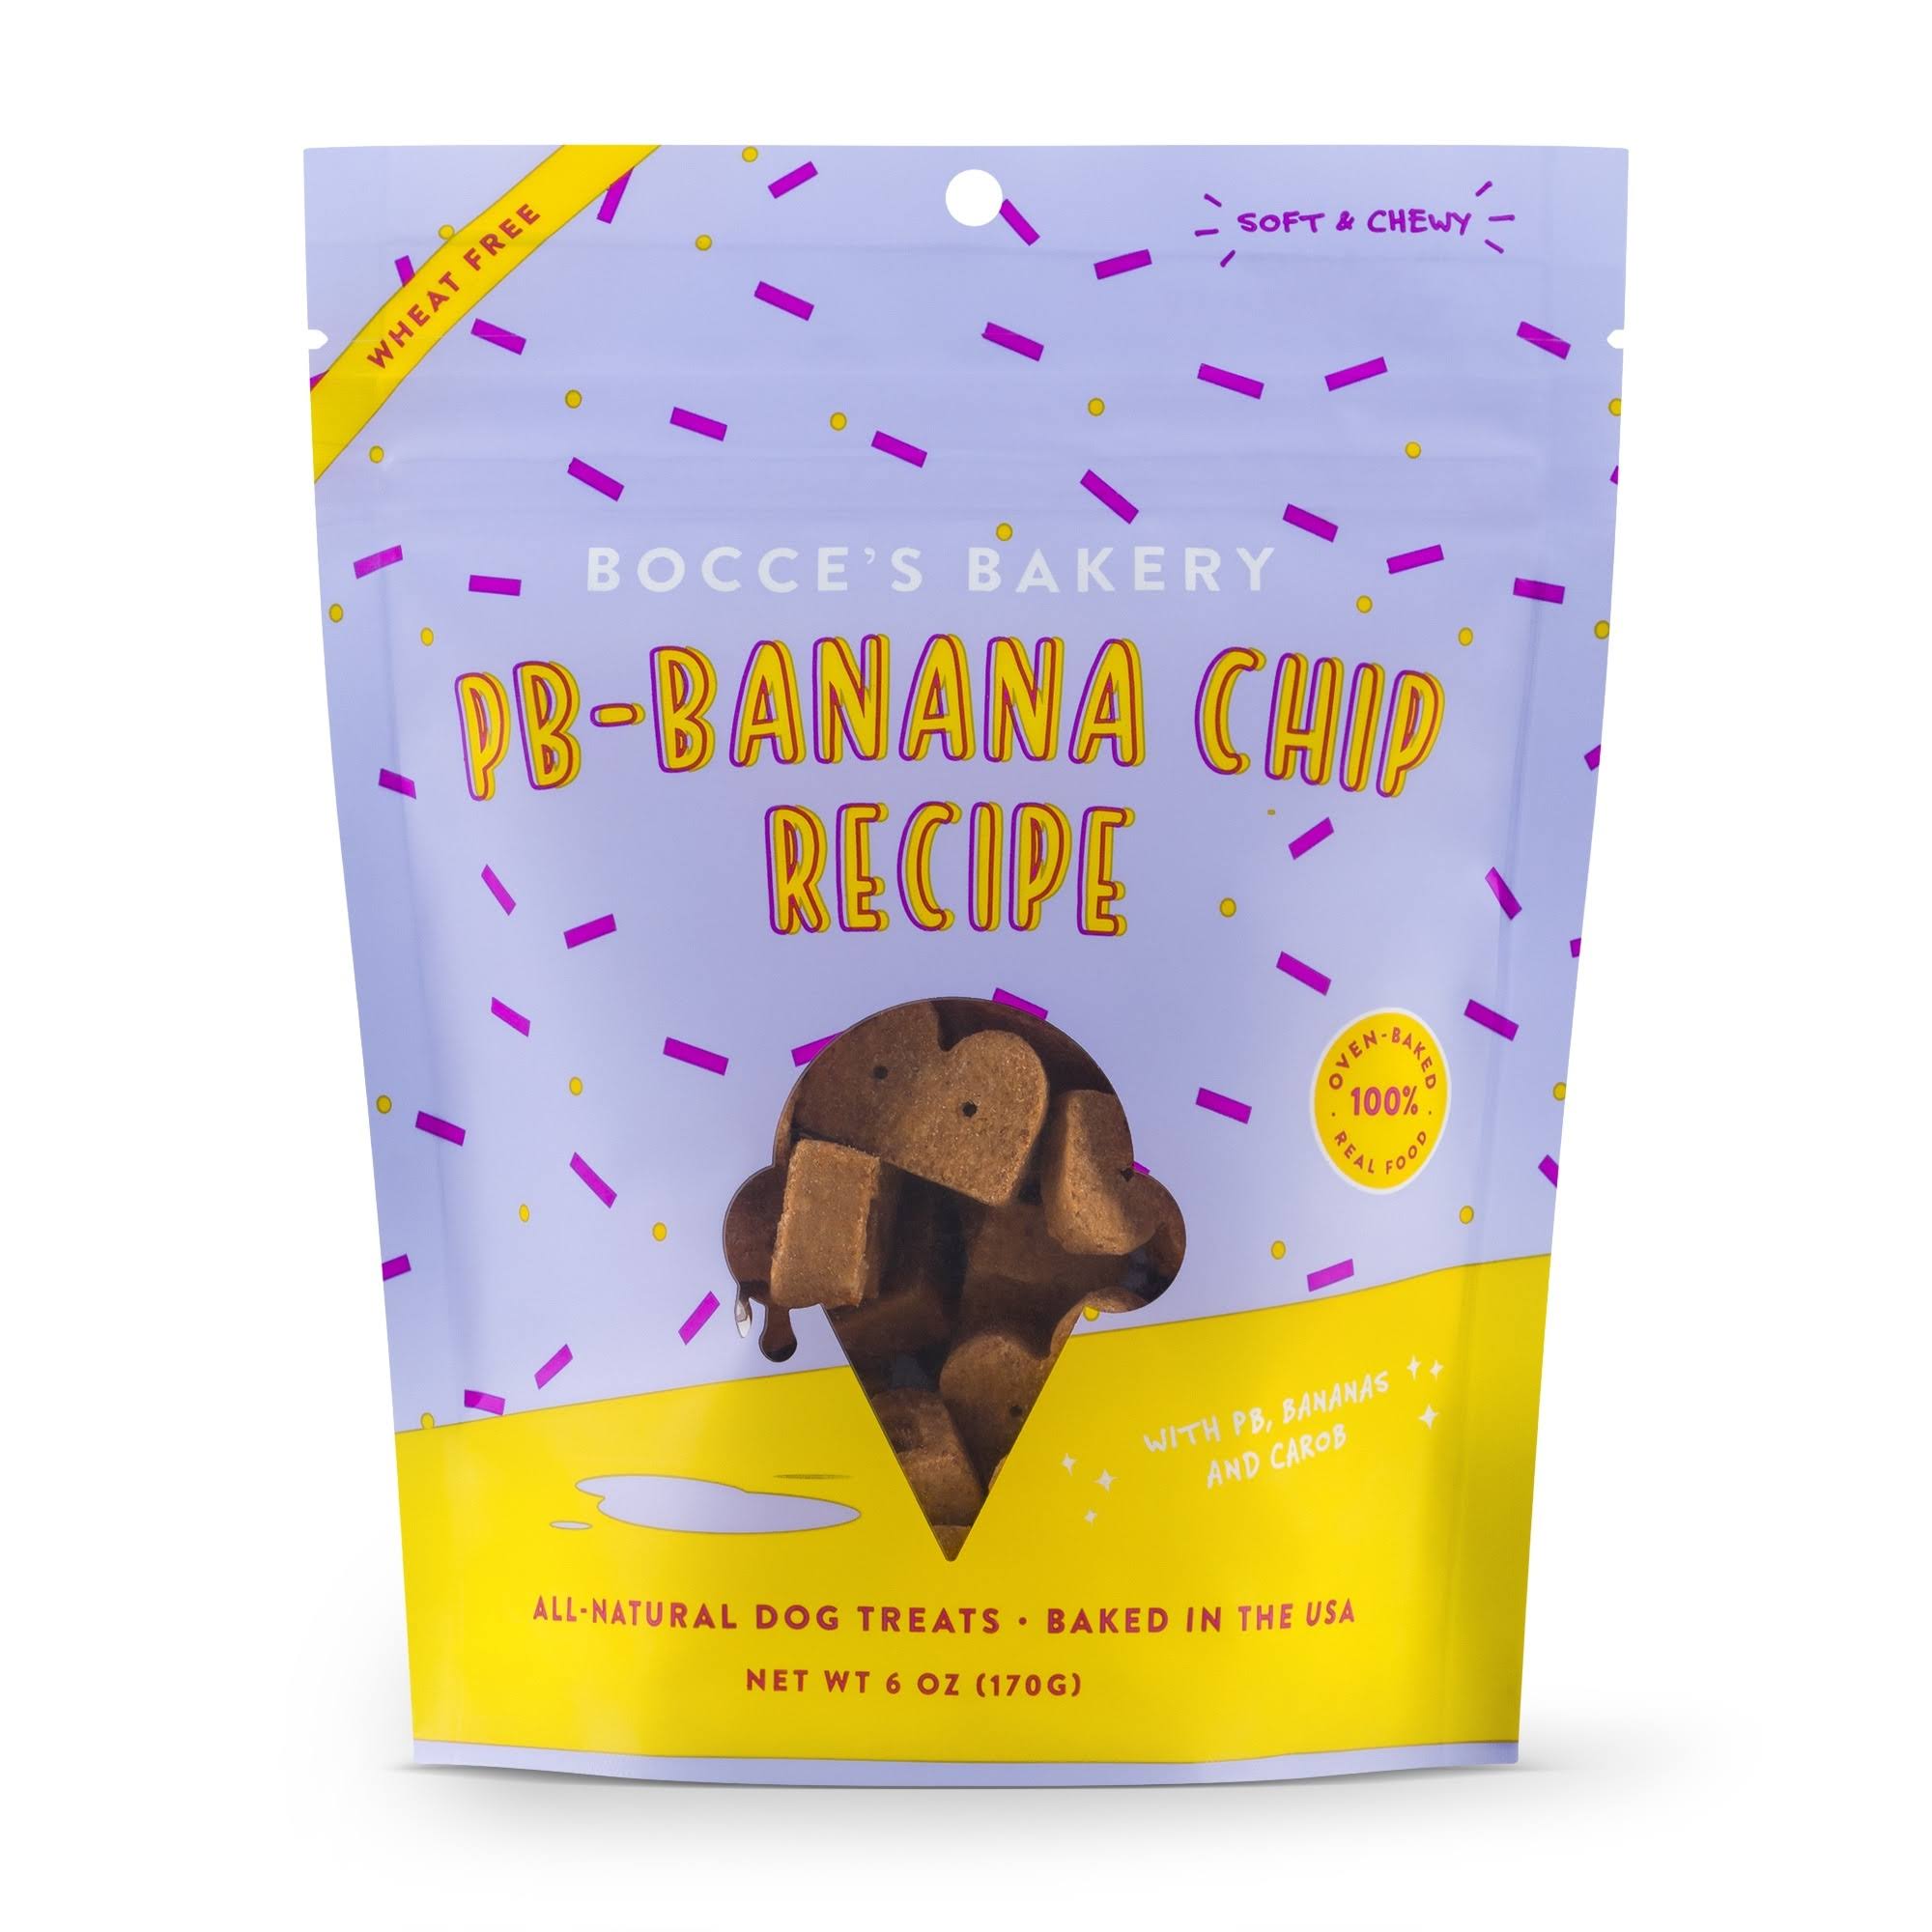 Bocce's Bakery PB Banana Chip Recipe Treats For Dogs, Wheat-Free Everyday Dog Treats, Real Ingredients, Baked in The USA, All-Natural Soft & Chewy